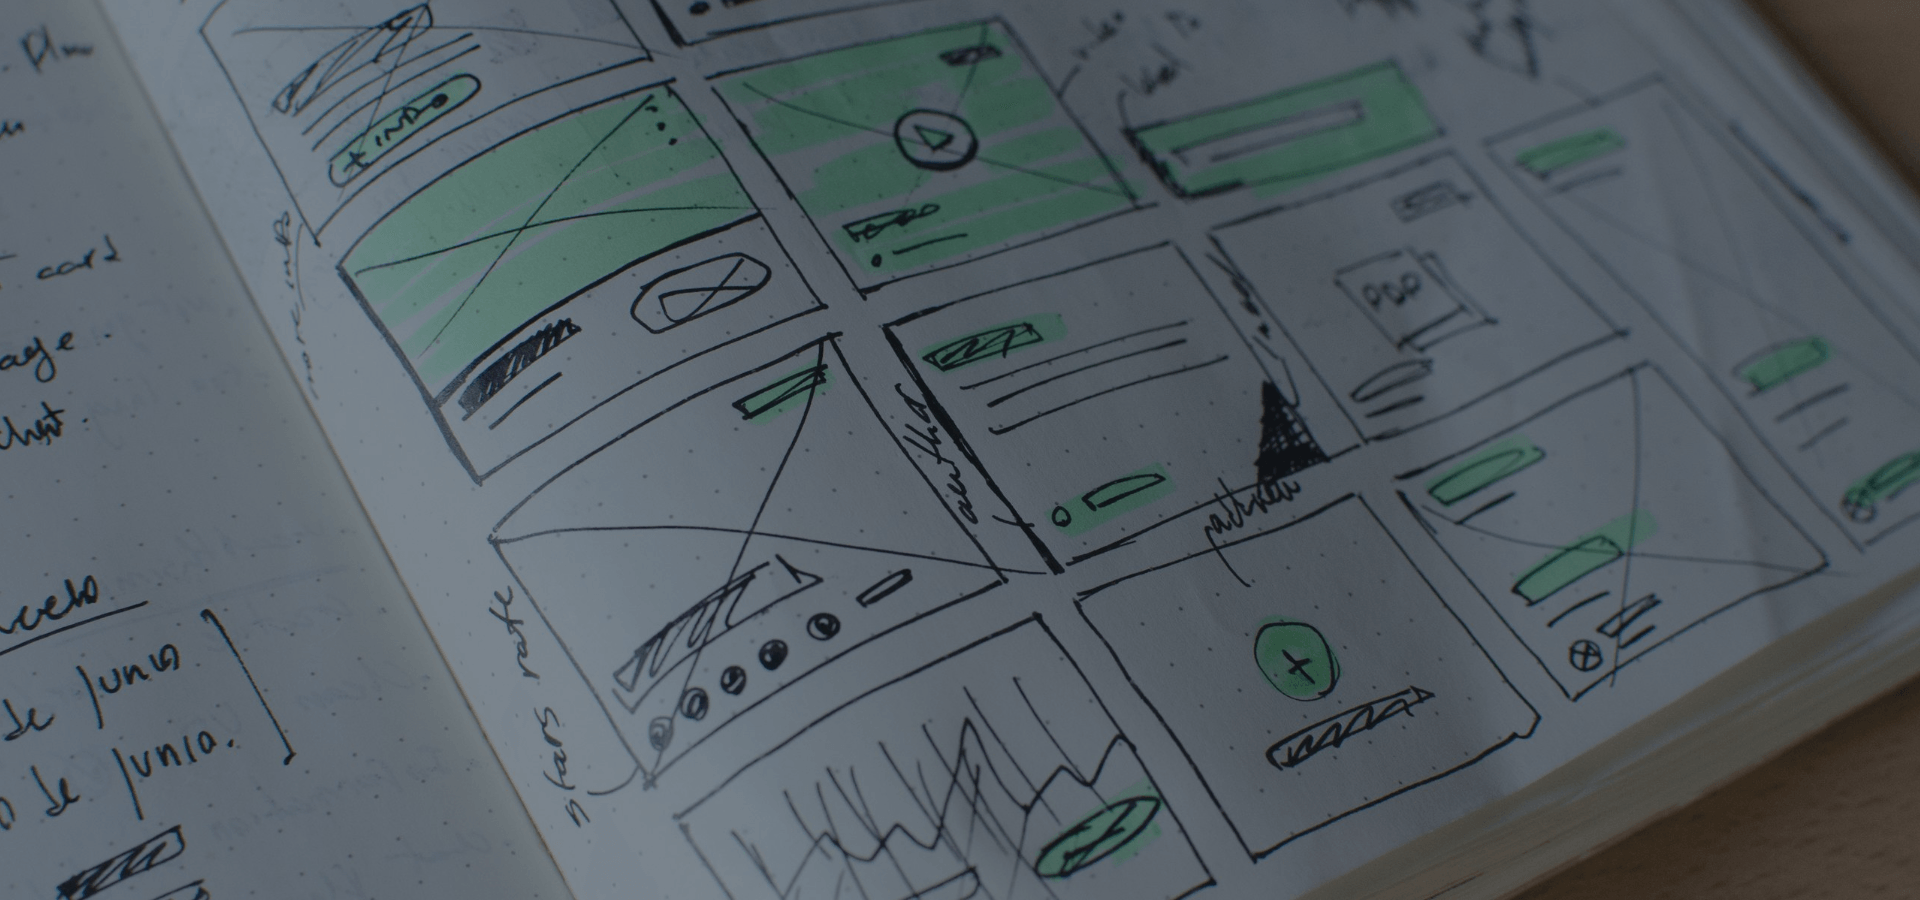 Wireframes on paper